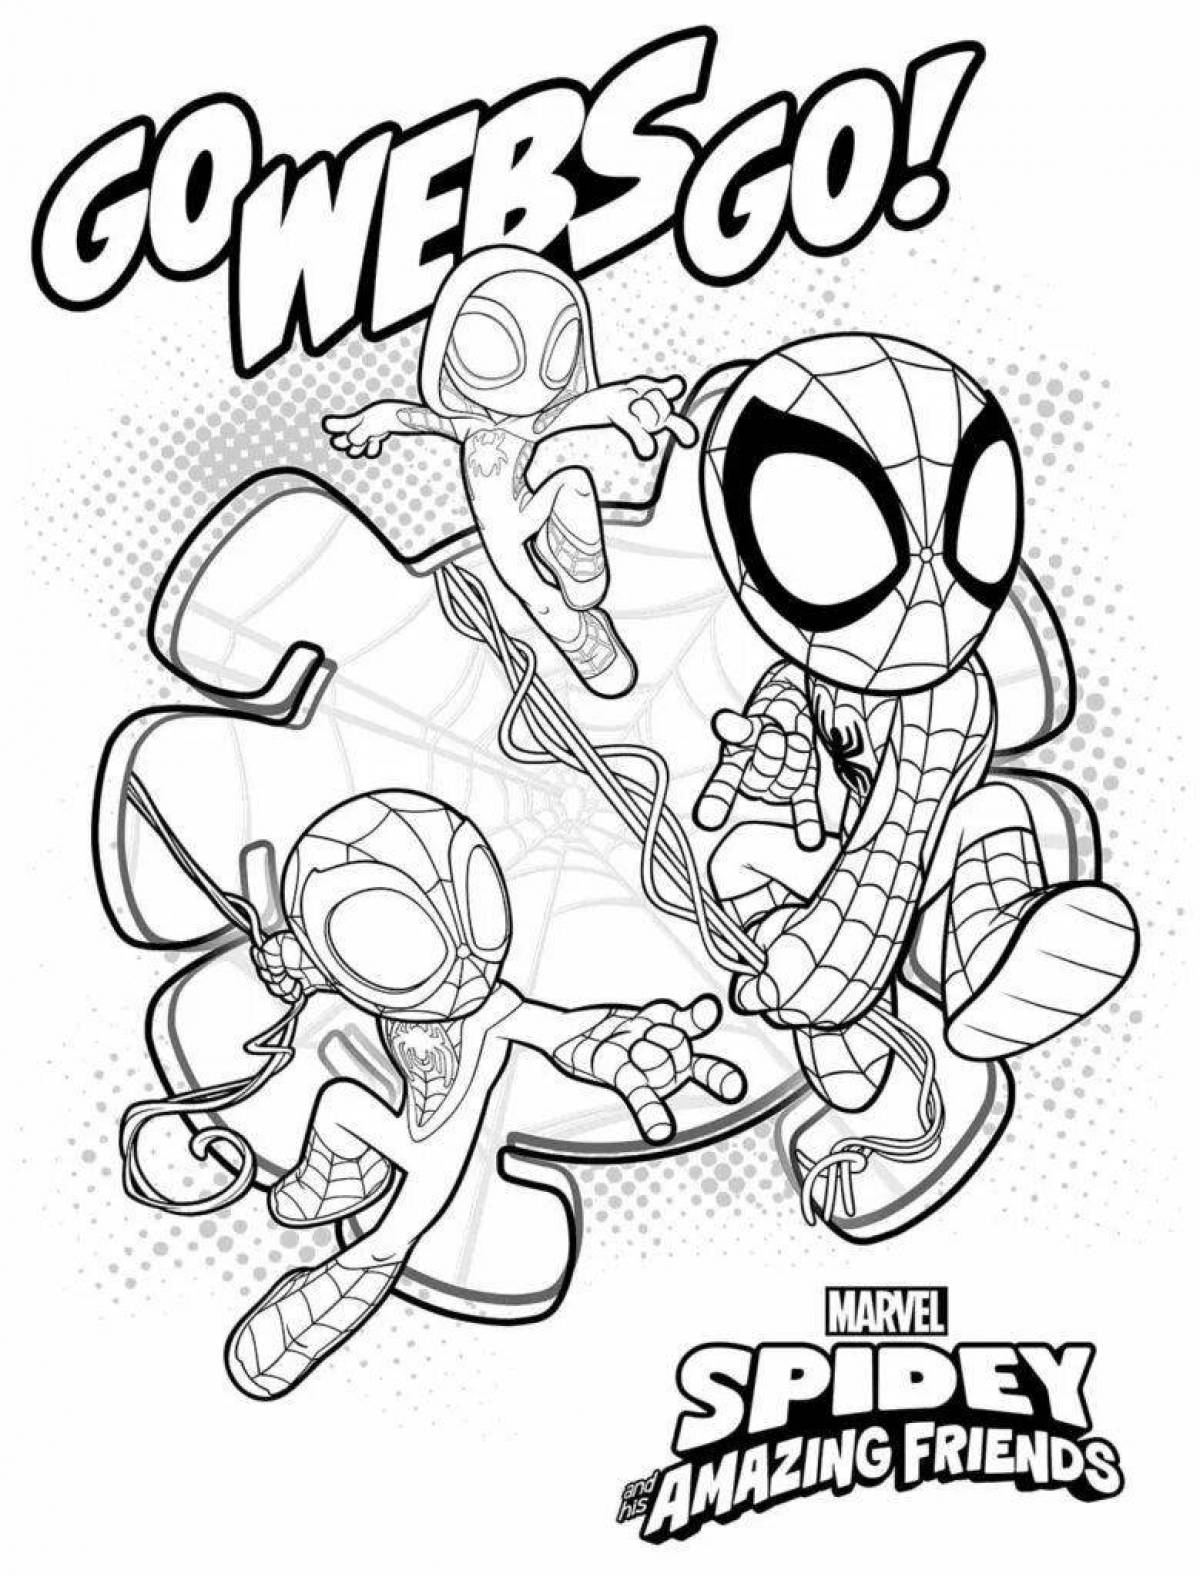 Spiderman's chilling ghost coloring page